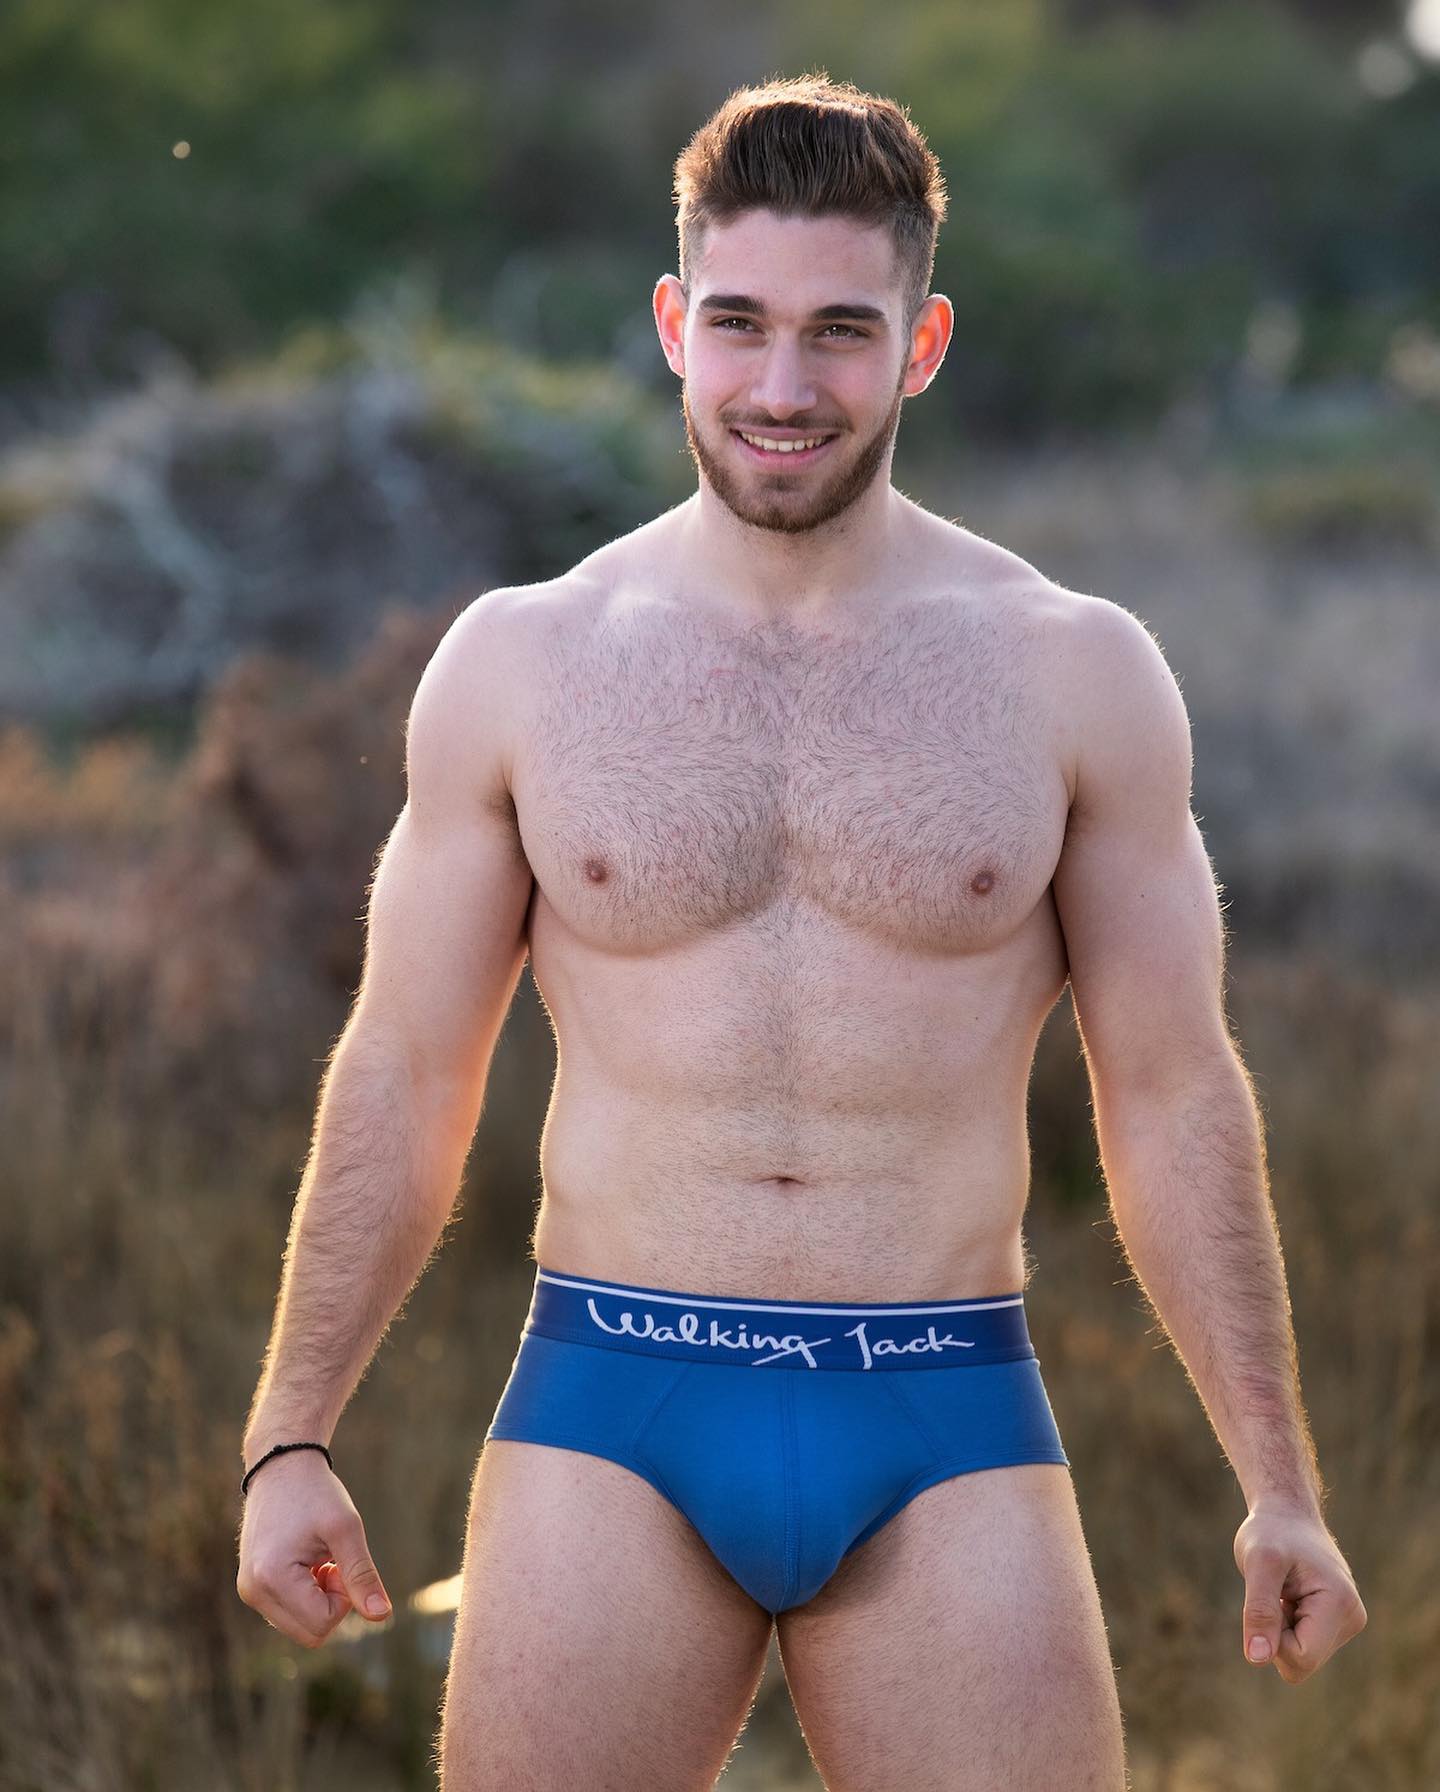 Start this month with a big smile and a pair of Solid Briefs in blue by Walking Jack:
____
https://menandunderwear.com/shop/underwear/walking-jack-bluebird-solid-briefs